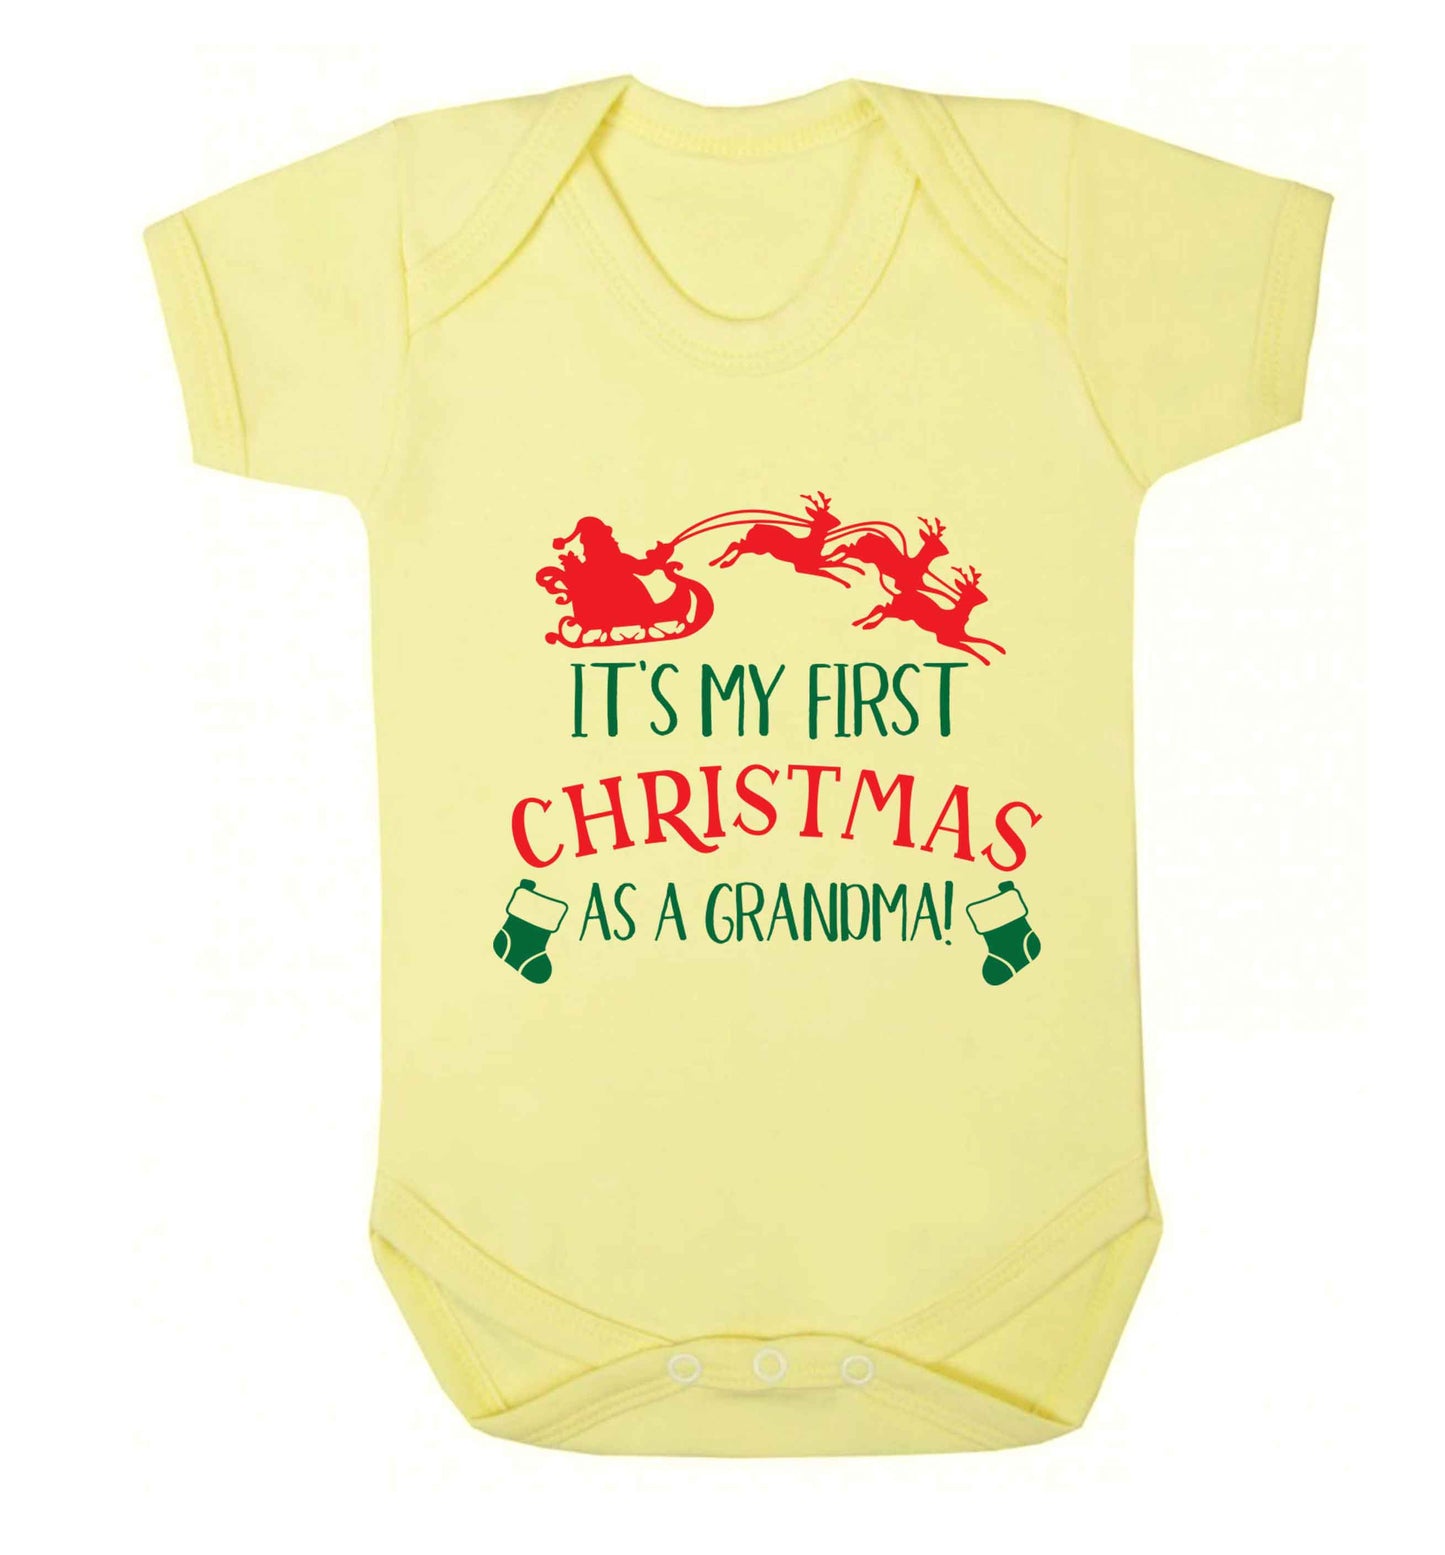 It's my first Christmas as a grandma! Baby Vest pale yellow 18-24 months